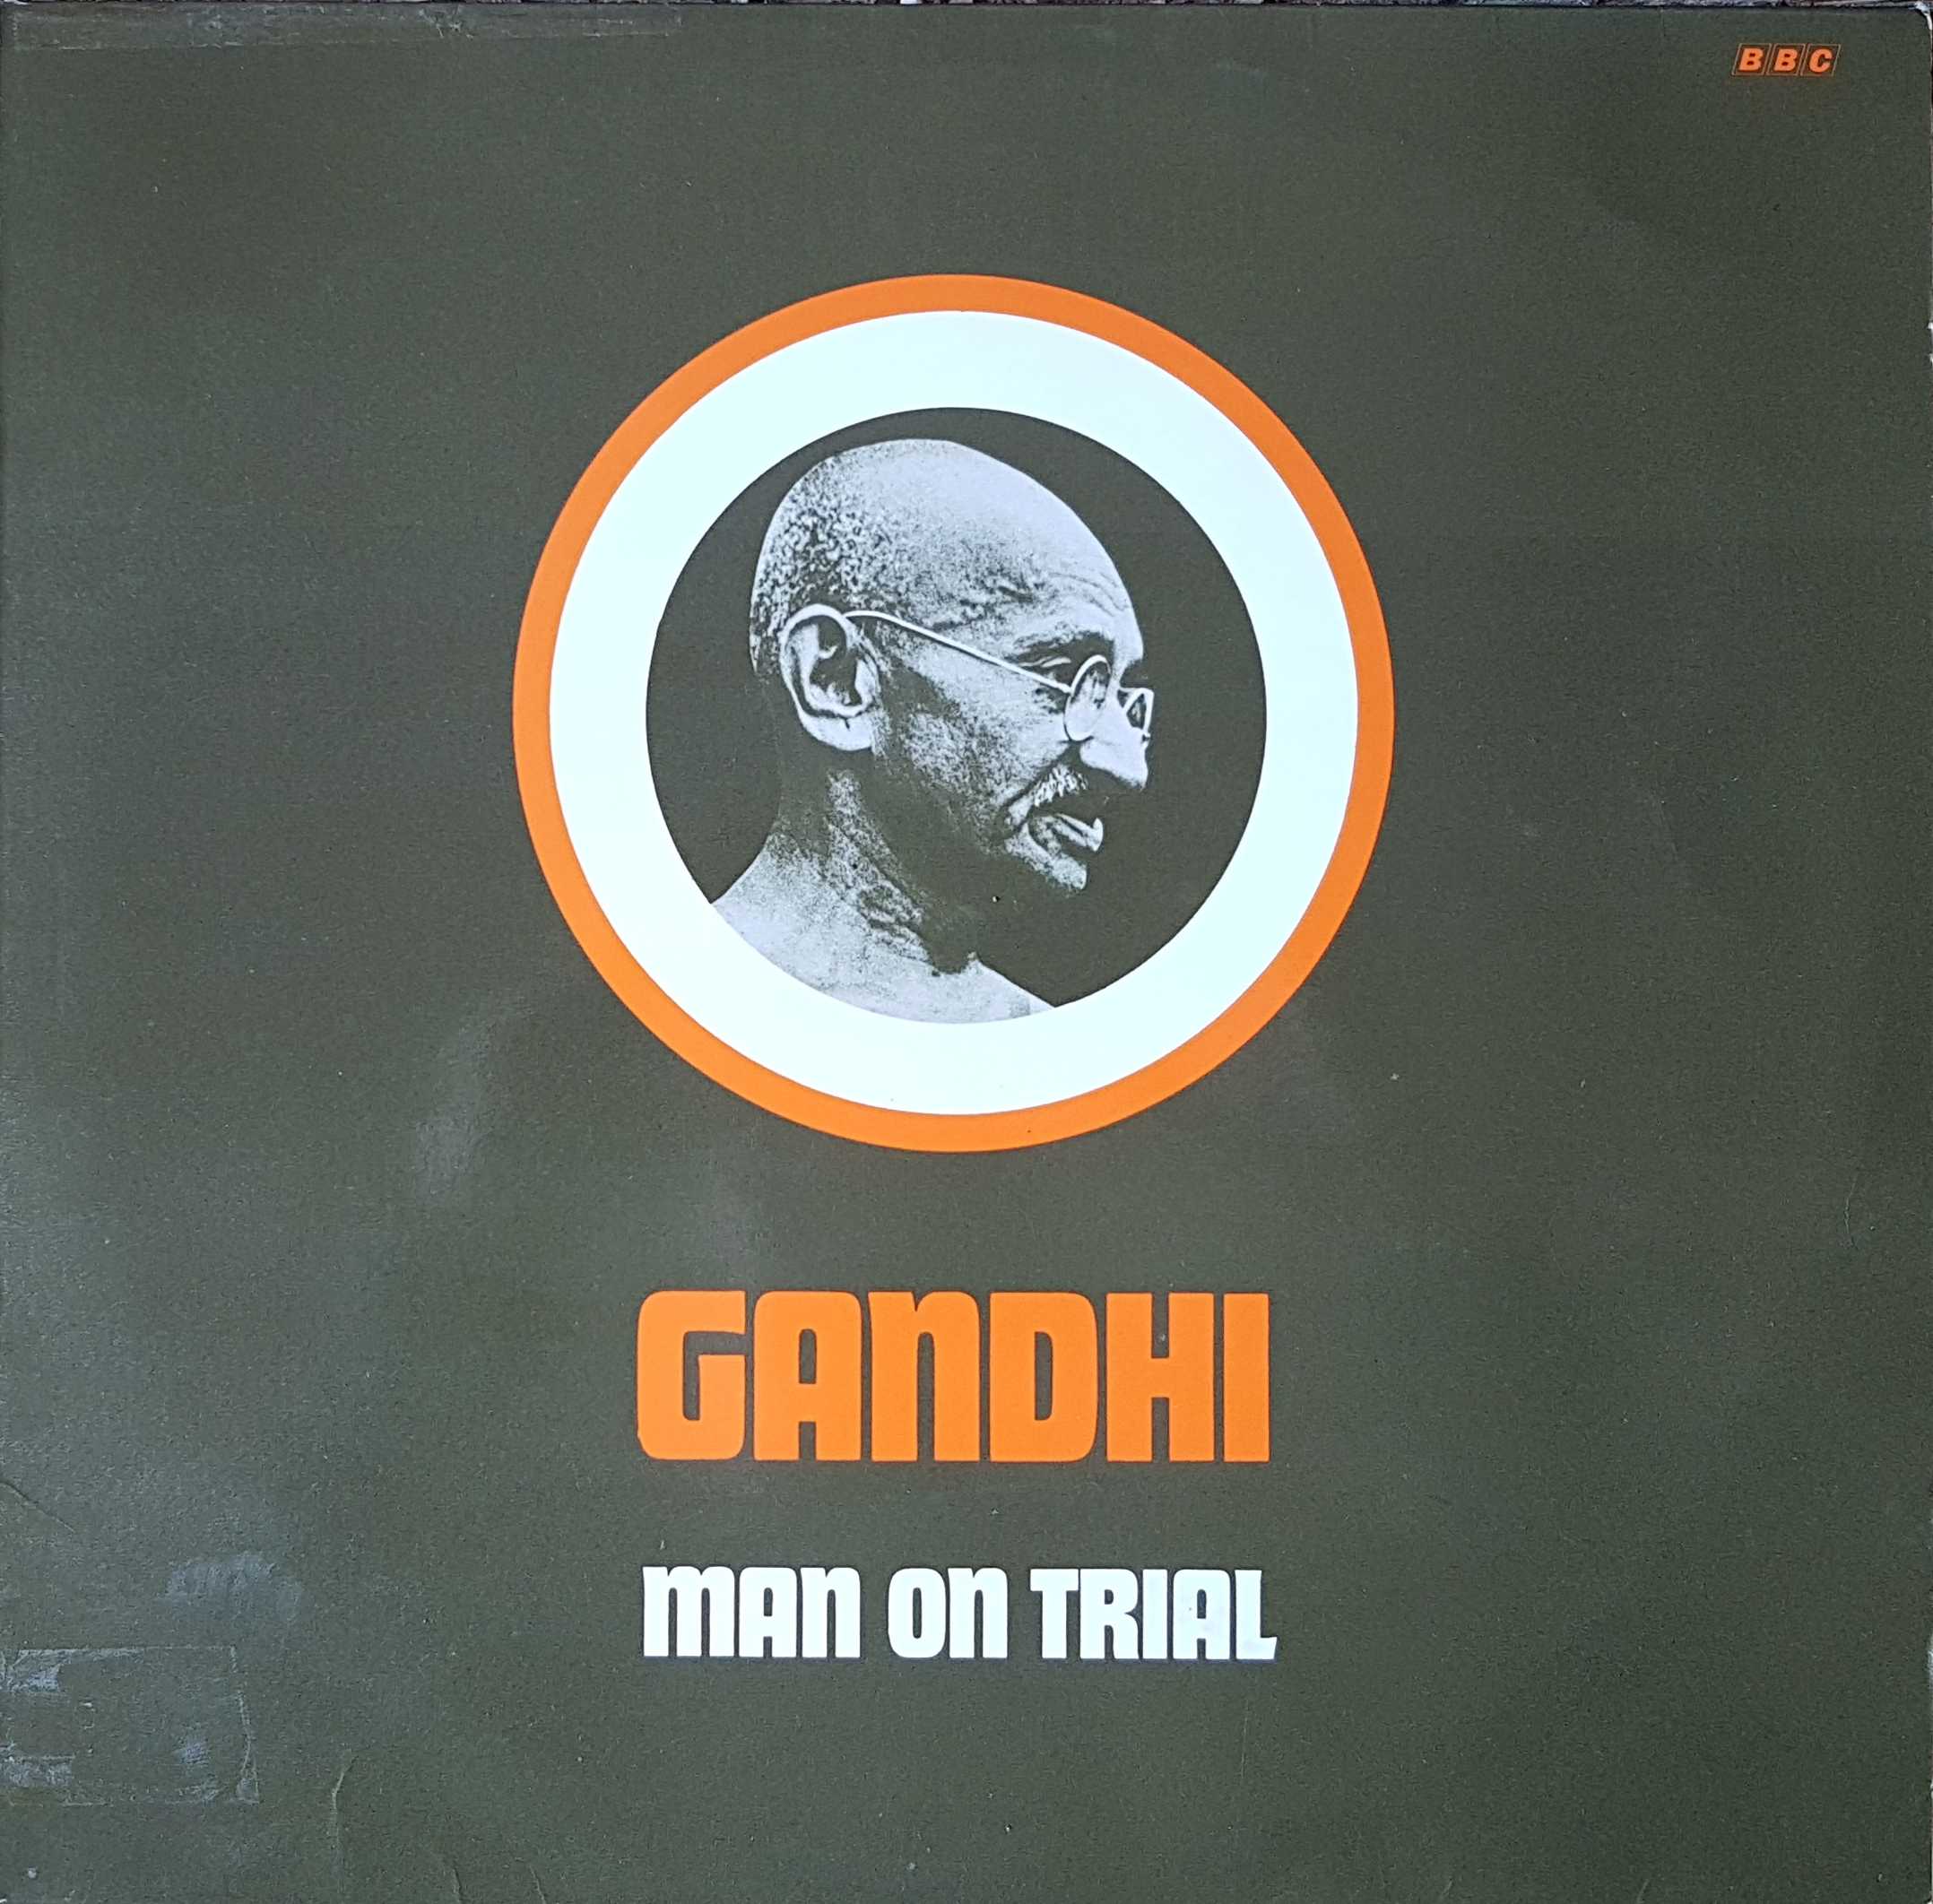 Picture of RESR 4 Gandhi - Man on trial by artist Francis Watson from the BBC albums - Records and Tapes library